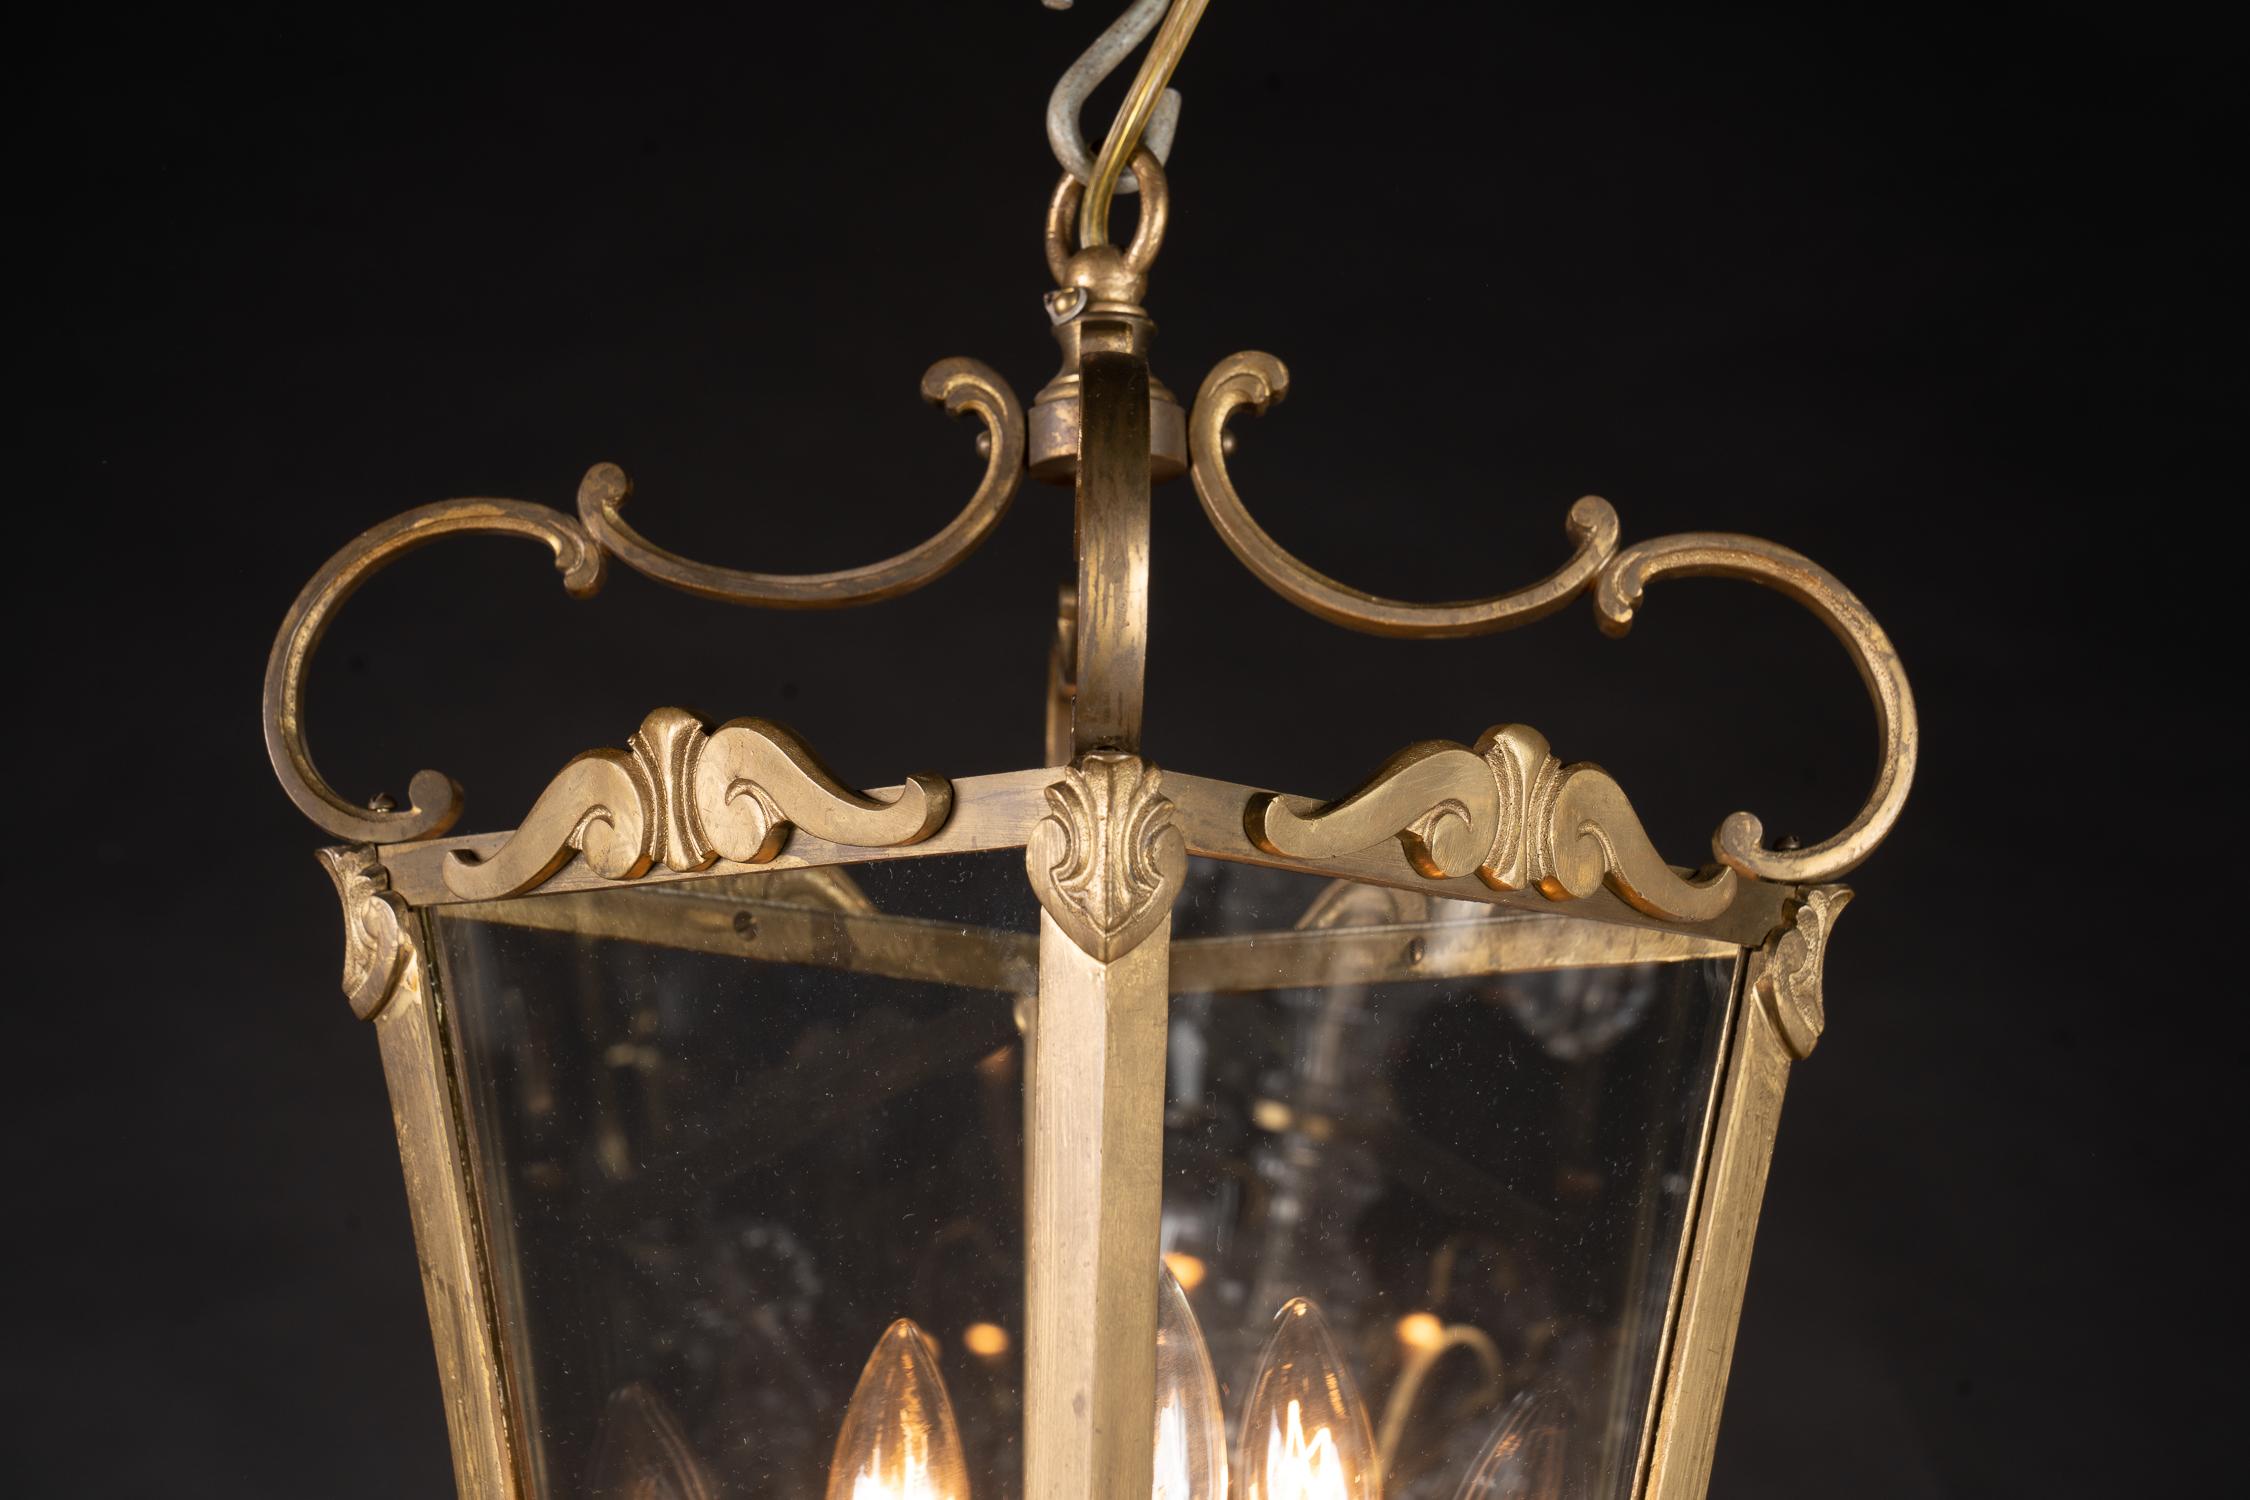 This beautiful and simple bronze lantern features glass panes and is suspended by four scrolling arms. The French fixture dates back to the mid 20th century and plays host three lights.